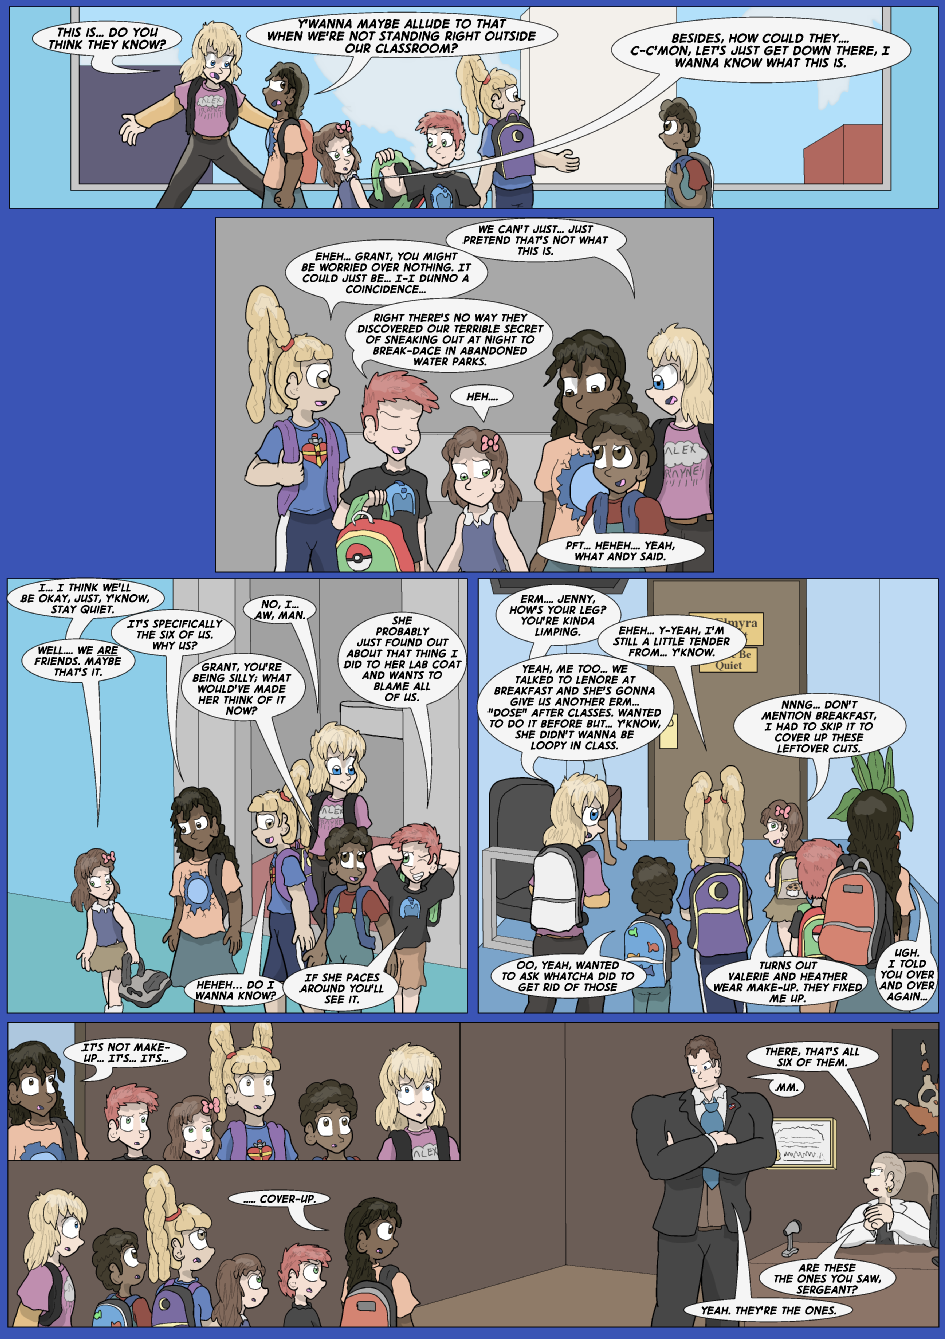 Showing Your Blue Colors- Page 3